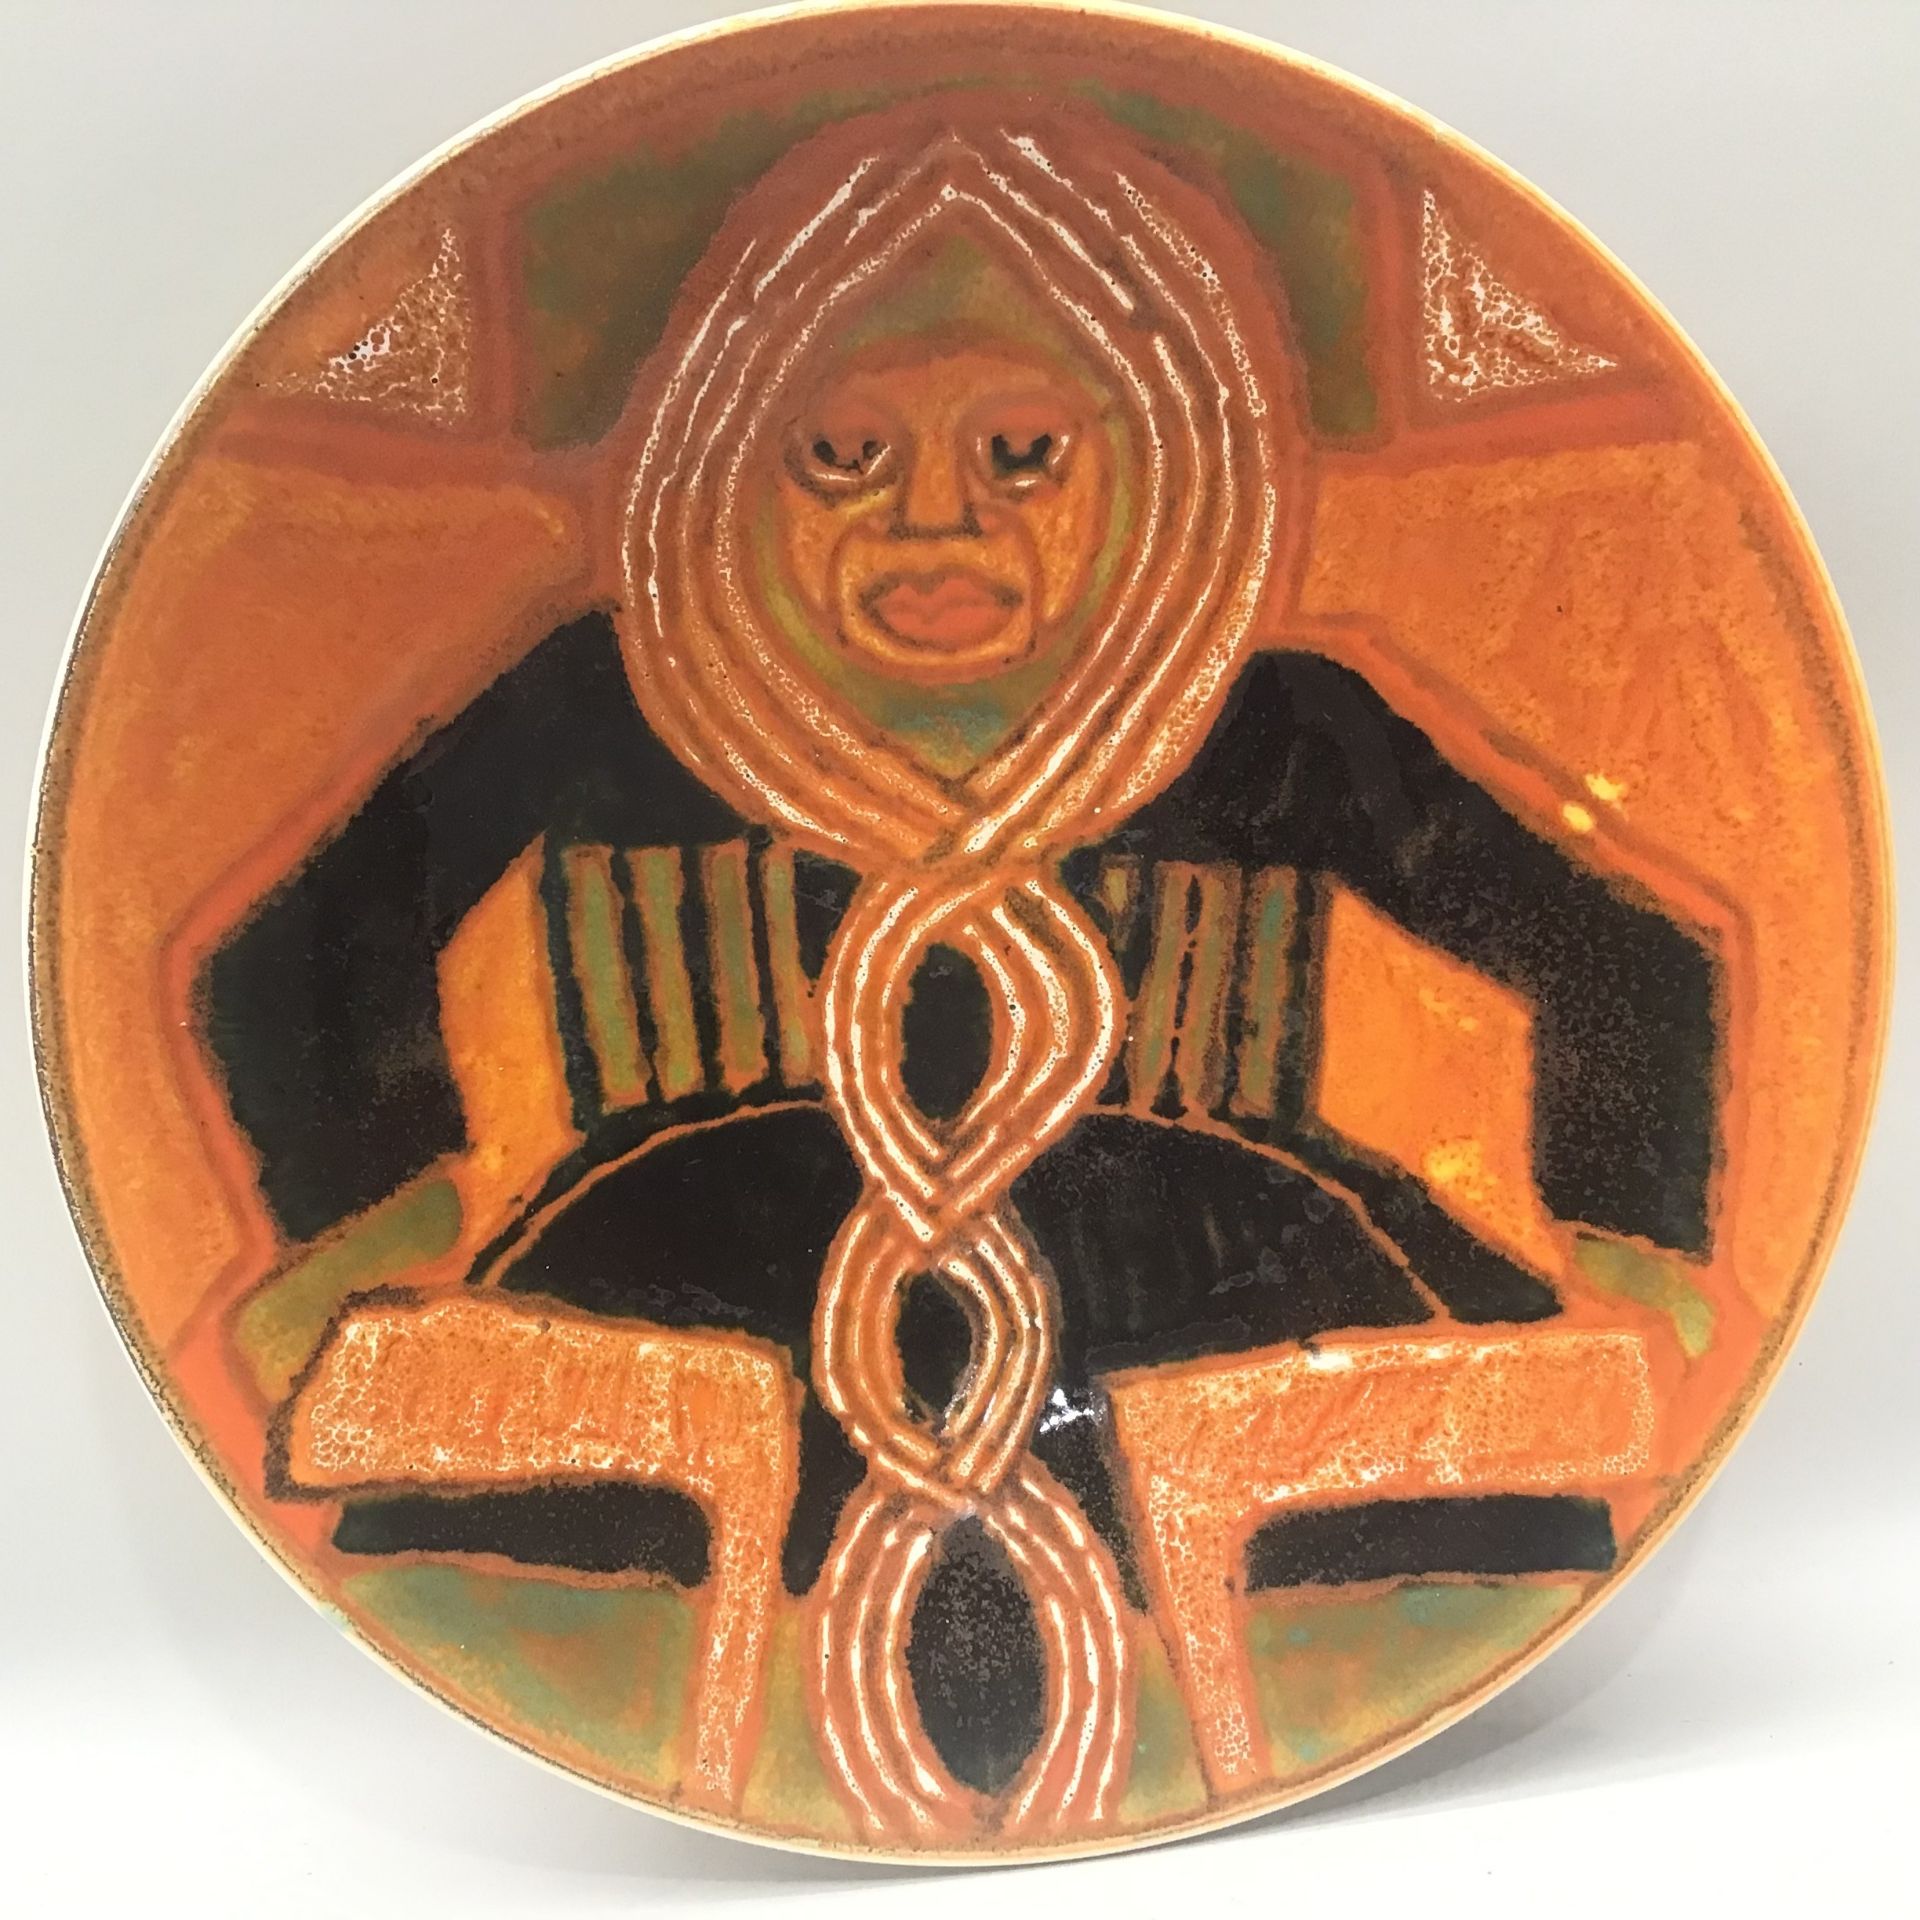 Poole Pottery unusual studio charger phase 2 mark no 46, 1964-1966 depicting a male figure, possibly